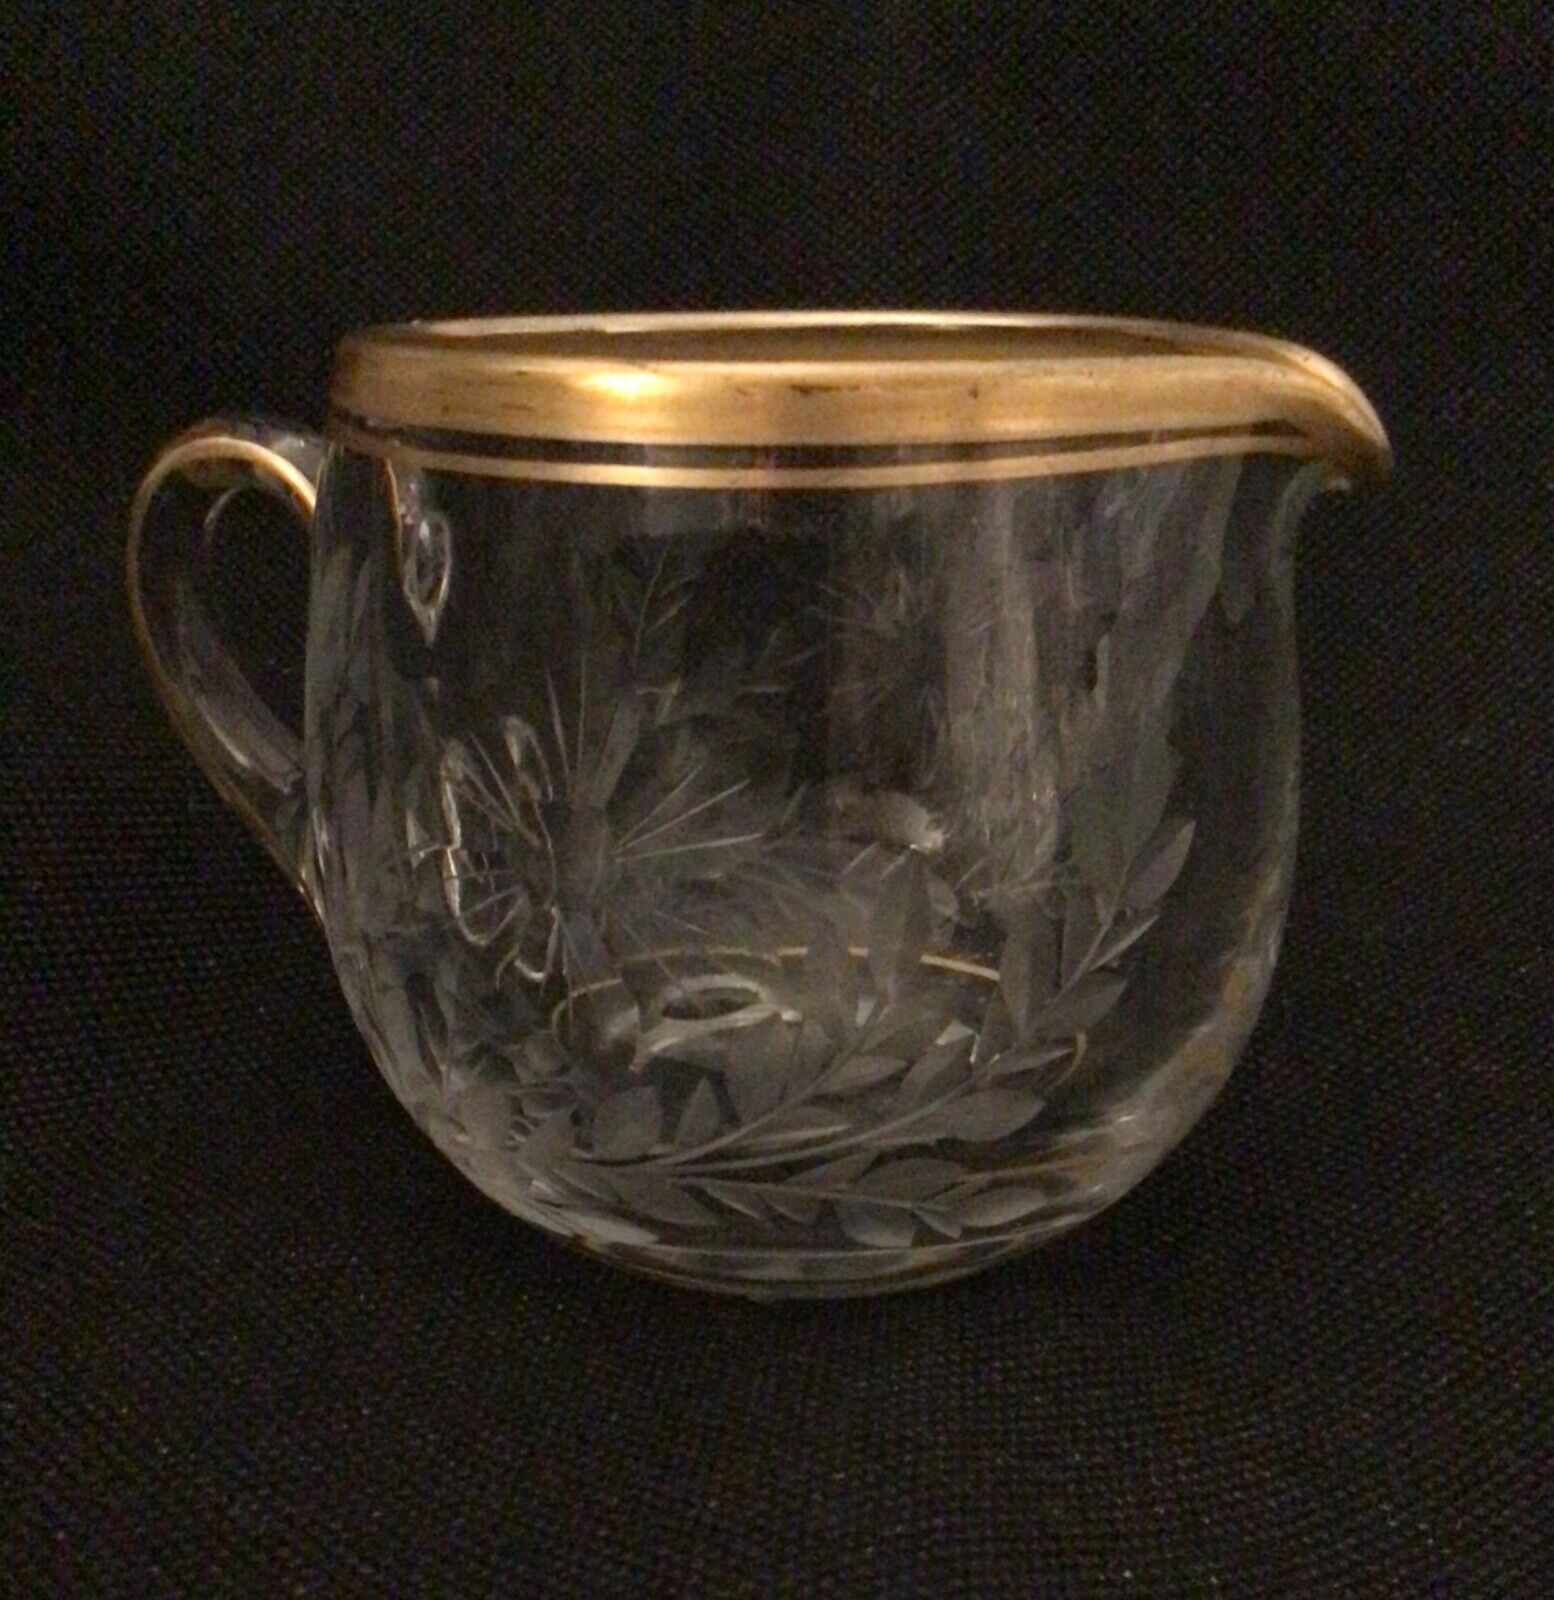 Primary image for HEISEY GLASS GOLD CREAMER ETCHED FLOWER LEAVES GROUND BOTTOM ELEGANT